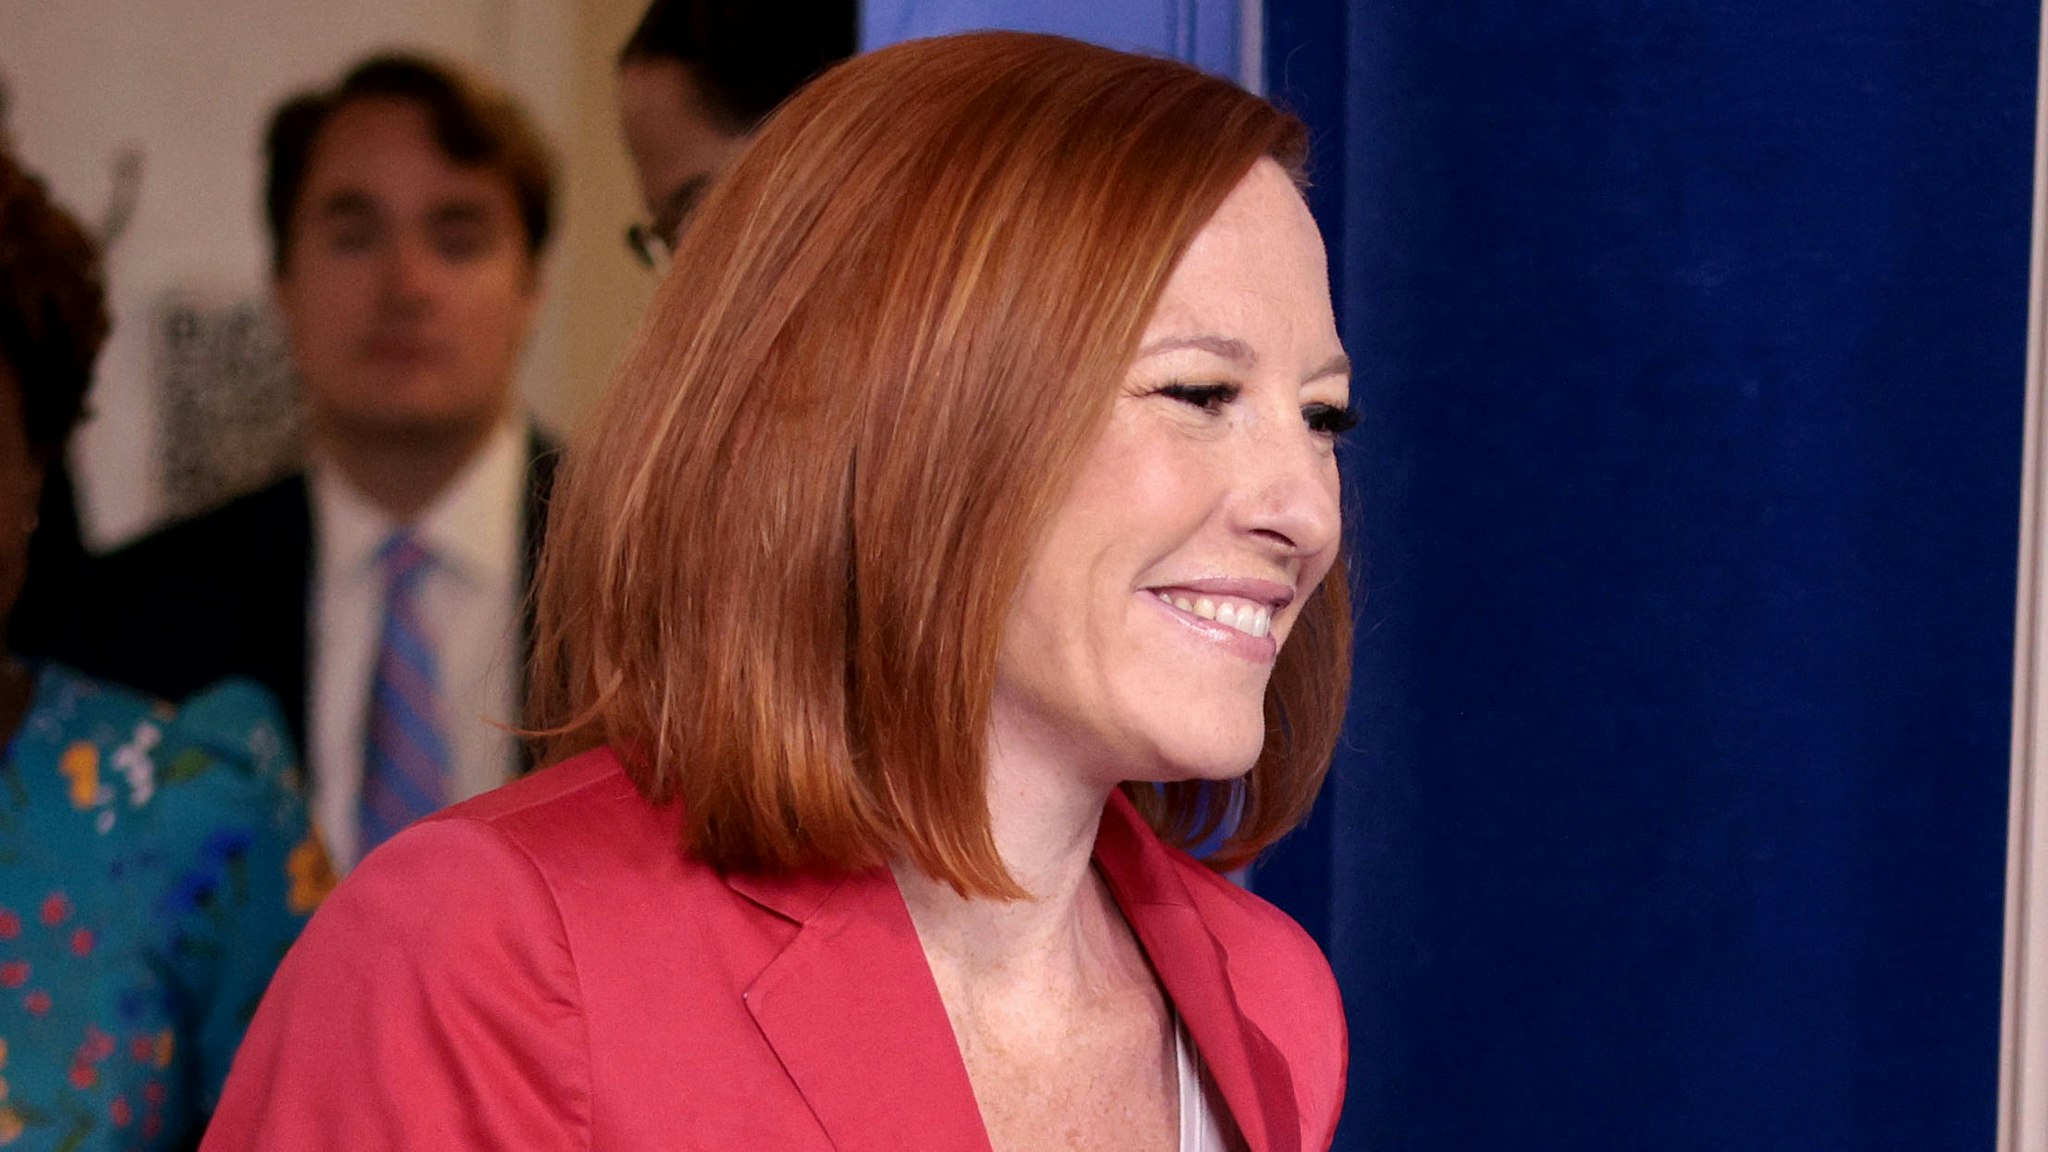 WASHINGTON, DC - JUNE 28: White House press secretary Jen Psaki arrives for her daily briefing on June 28, 2021 in Washington, DC. Psaki answered a range of questions related to pending infrastructure legislation and other topics.